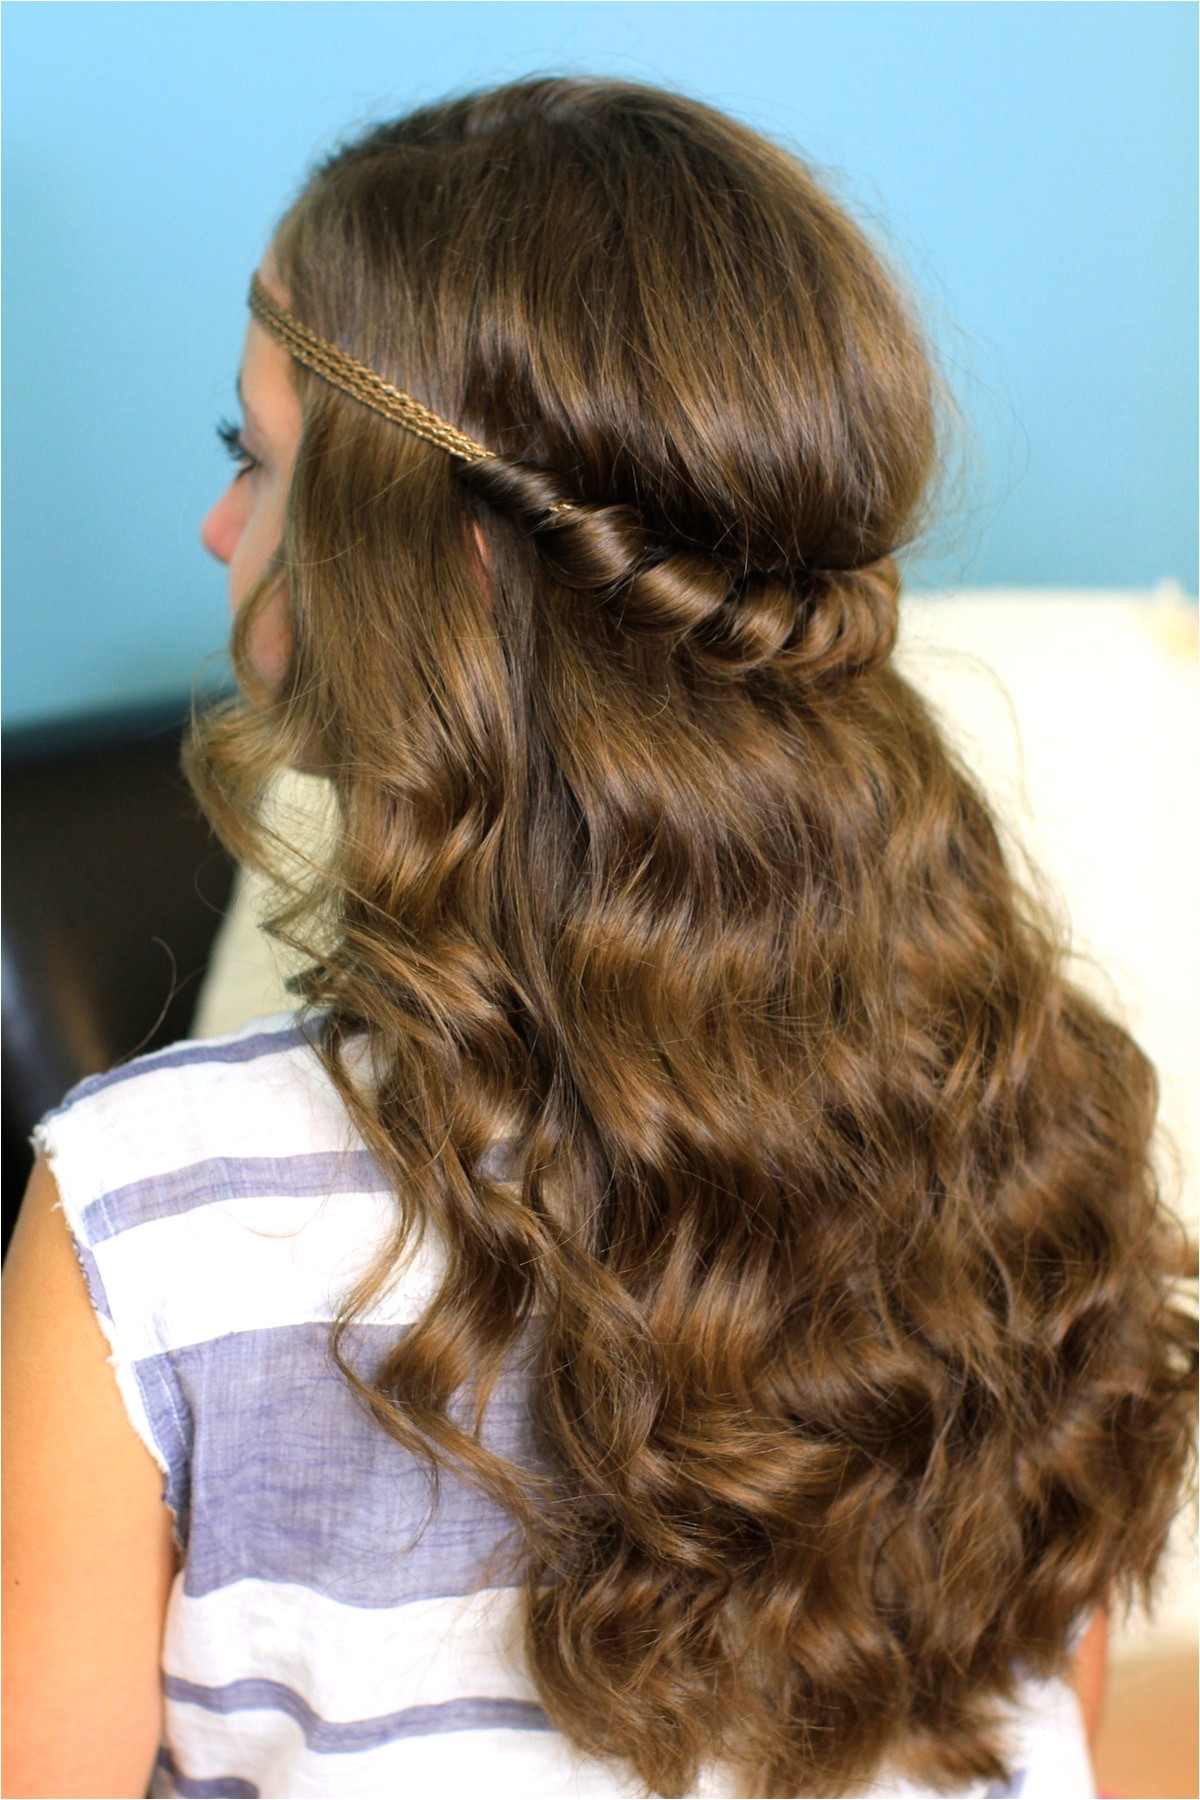 Cute Wand Hairstyles Pretty Hair Styles with Wand